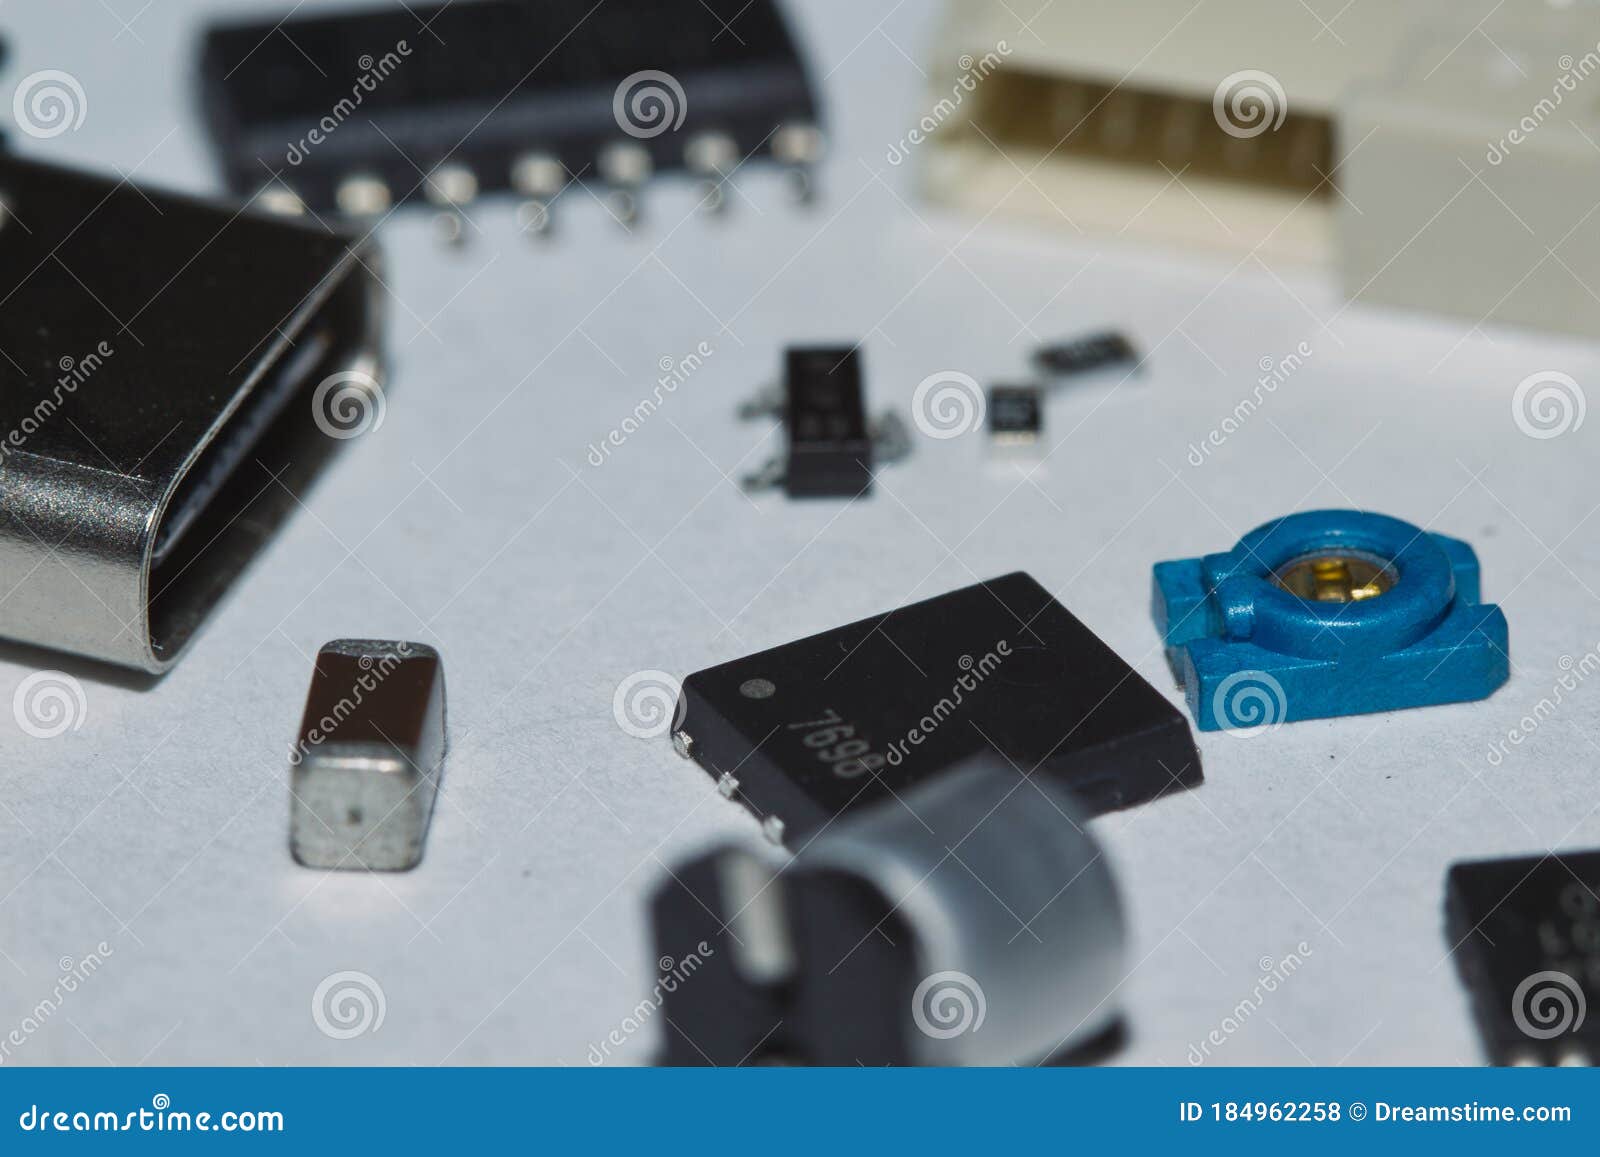 scattered smt components on white background